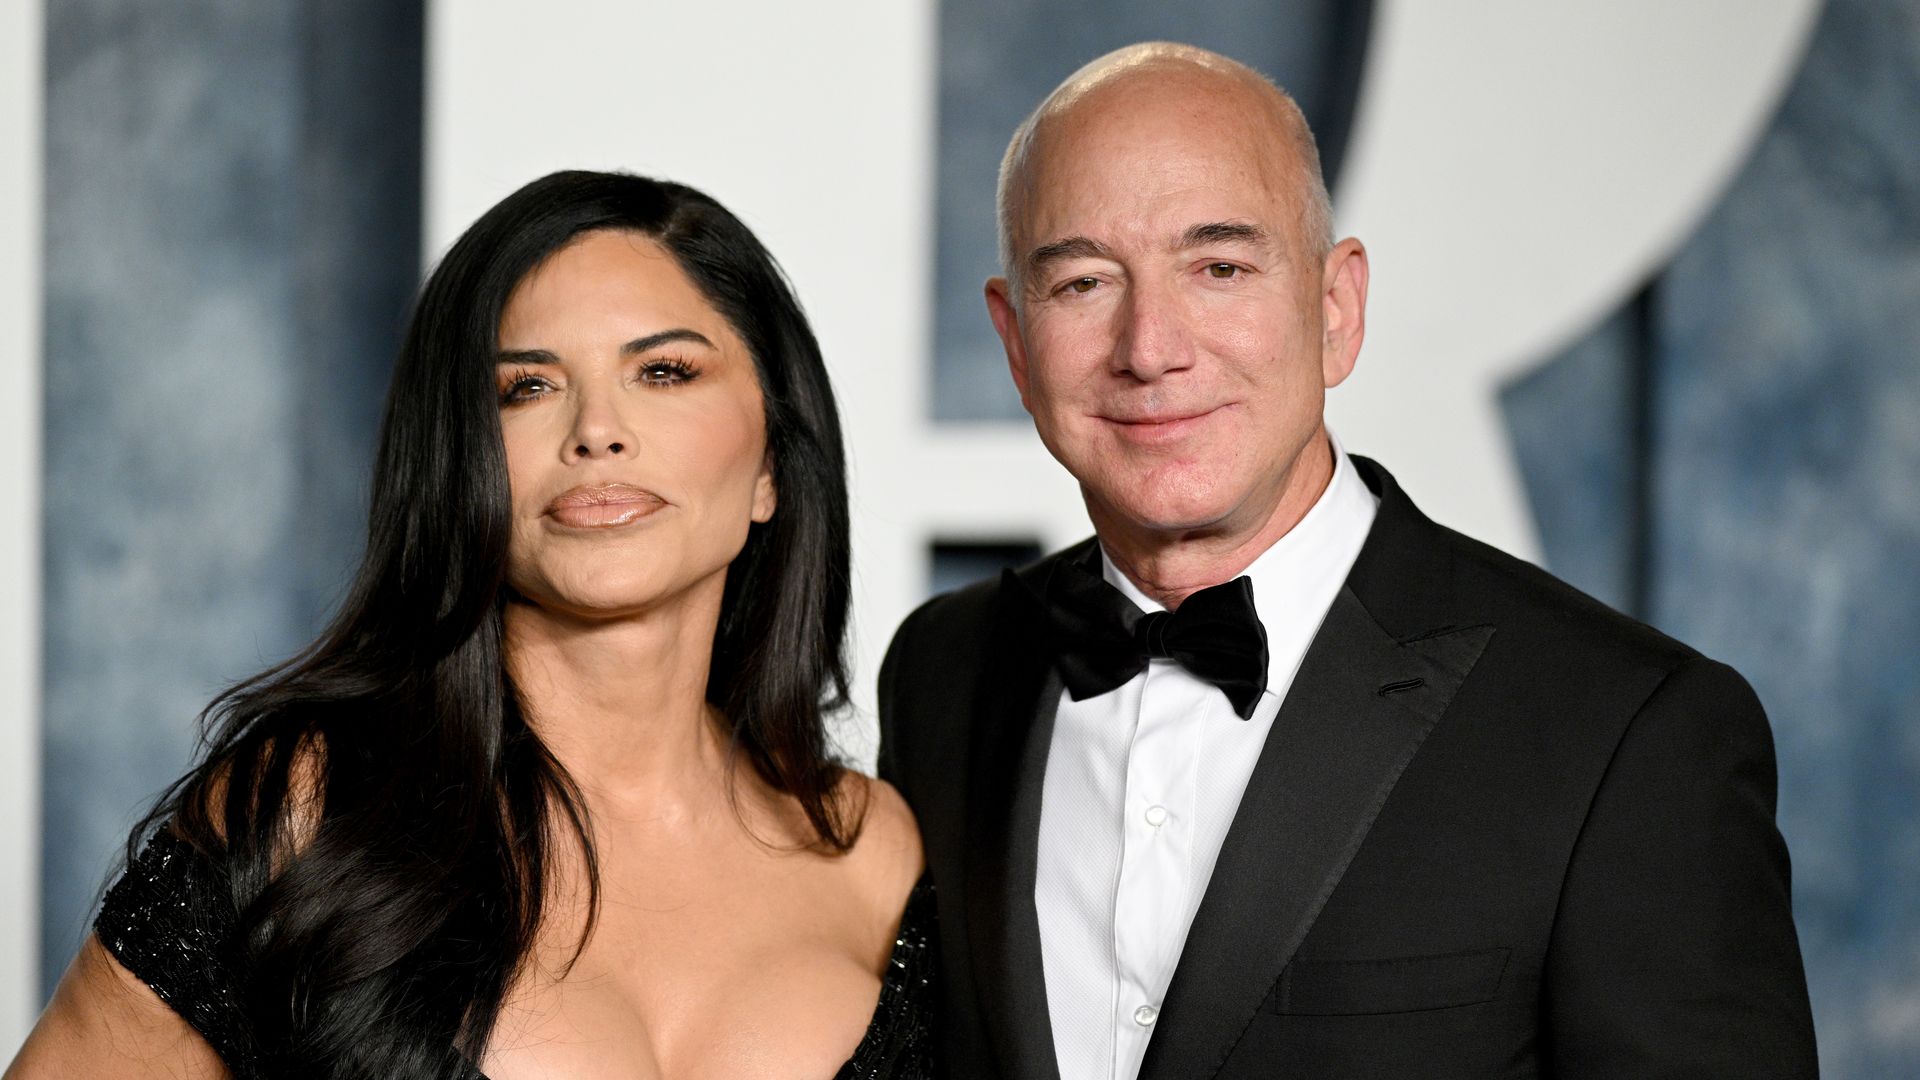 Lauren Sanchez and Jeff Bezos attend the 2023 Vanity Fair Oscar Party Hosted By Radhika Jones at Wallis Annenberg Center for the Performing Arts on March 12, 2023 in Beverly Hills, California